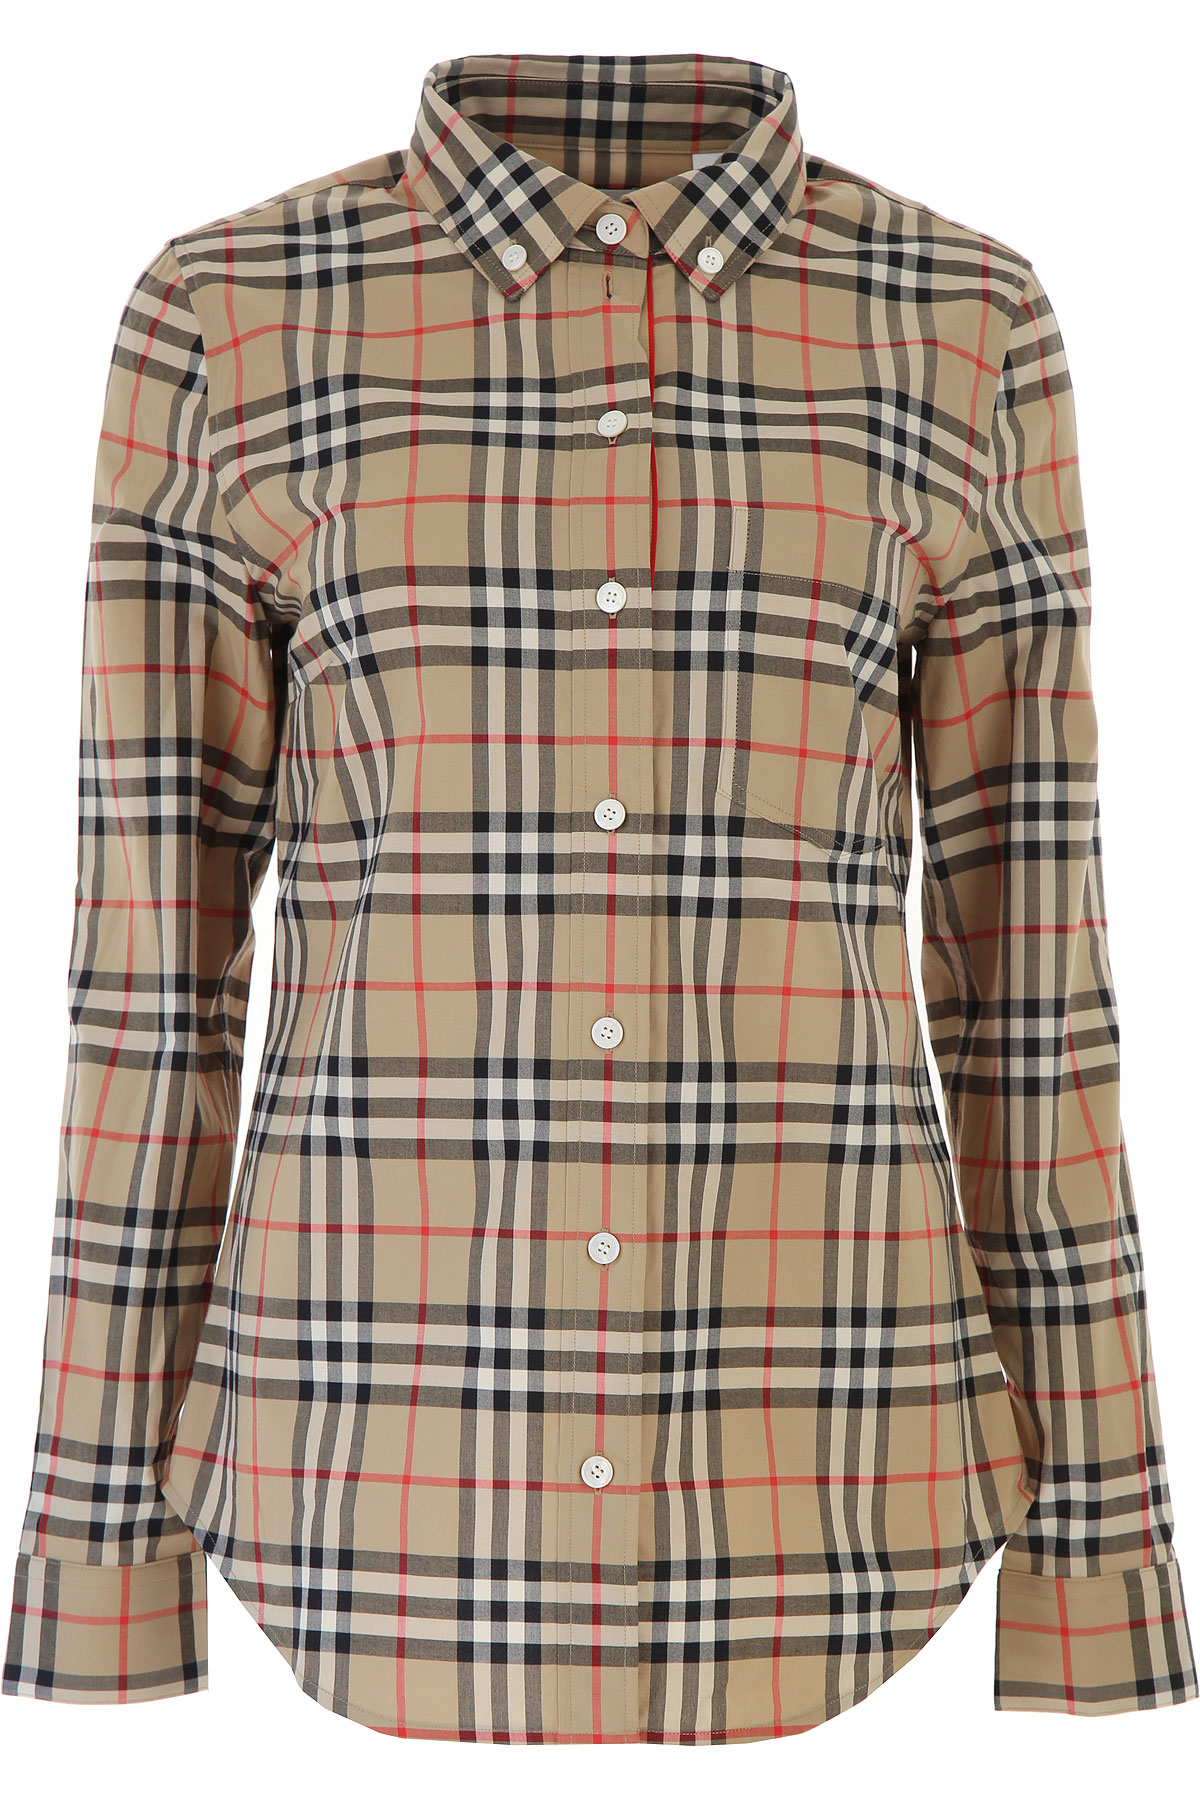 Womens Clothing Burberry, Style code: 8009033-a7028-